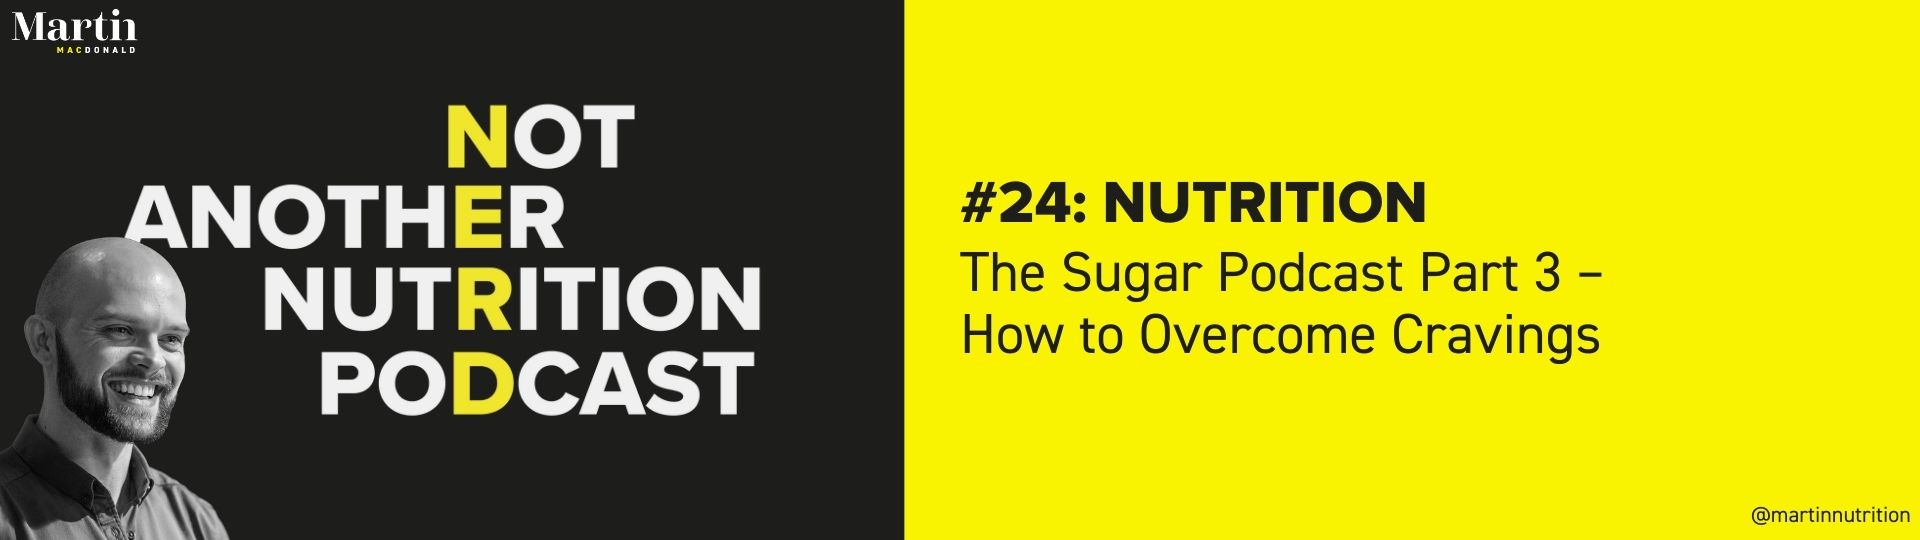 The Sugar Podcast Part 3 - How to Overcome Cravings